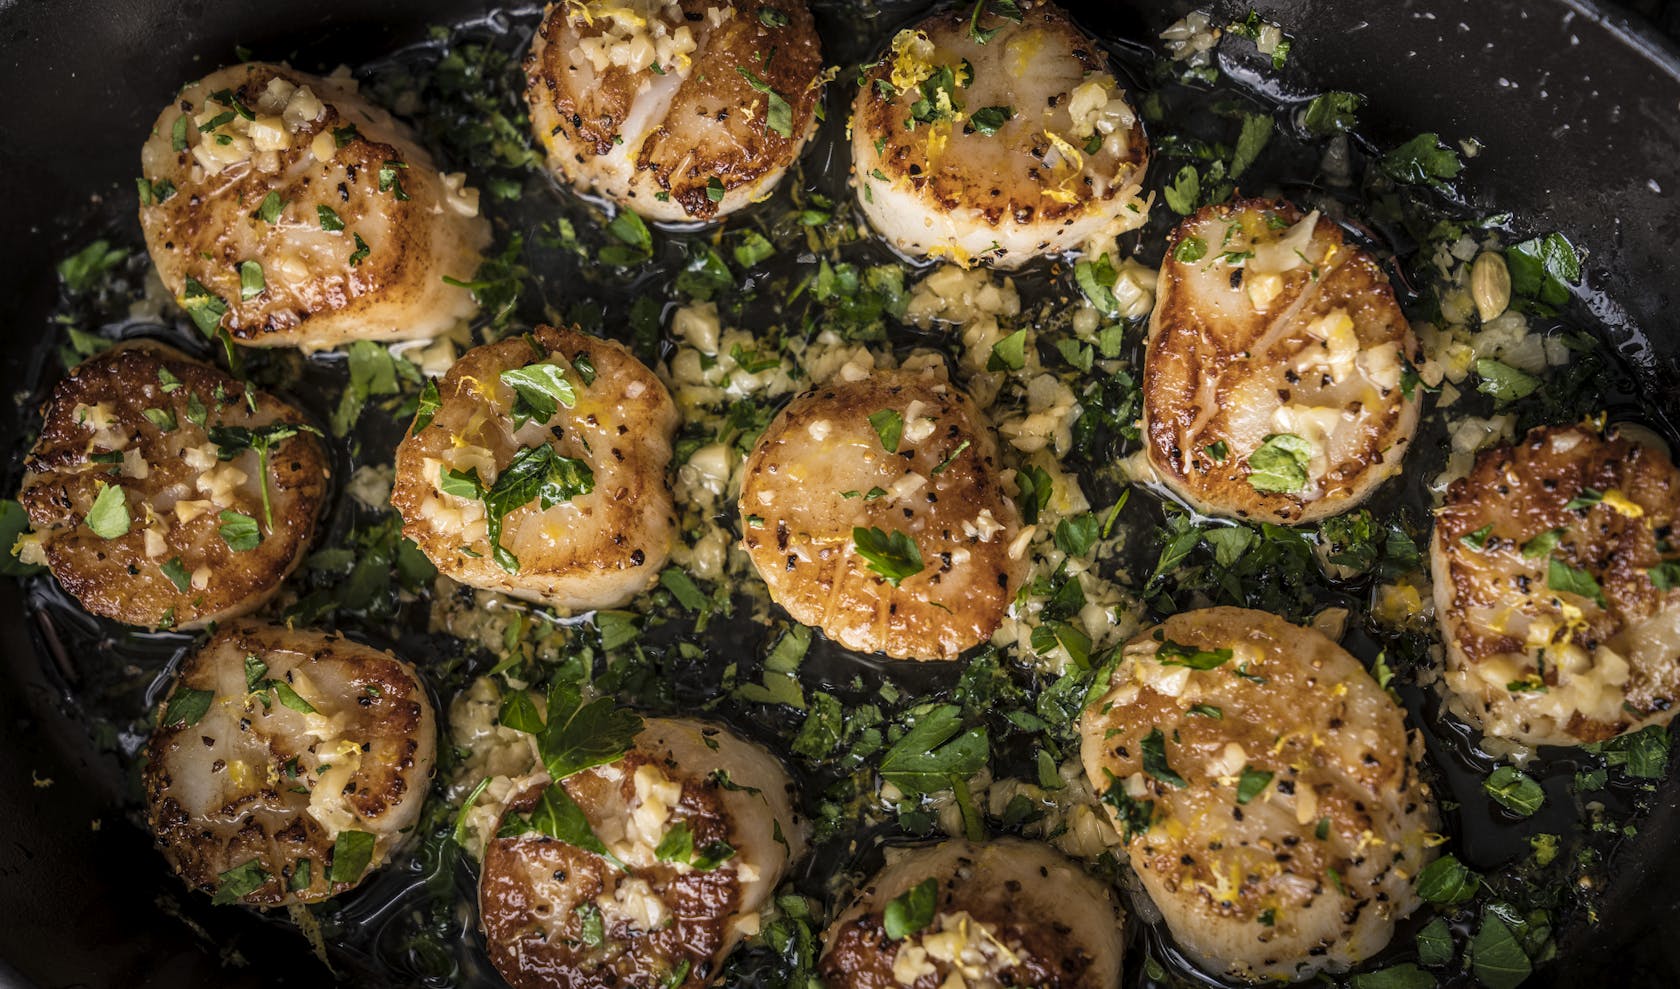 Smoked Scallops With Citrus & Garlic Butter Sauce